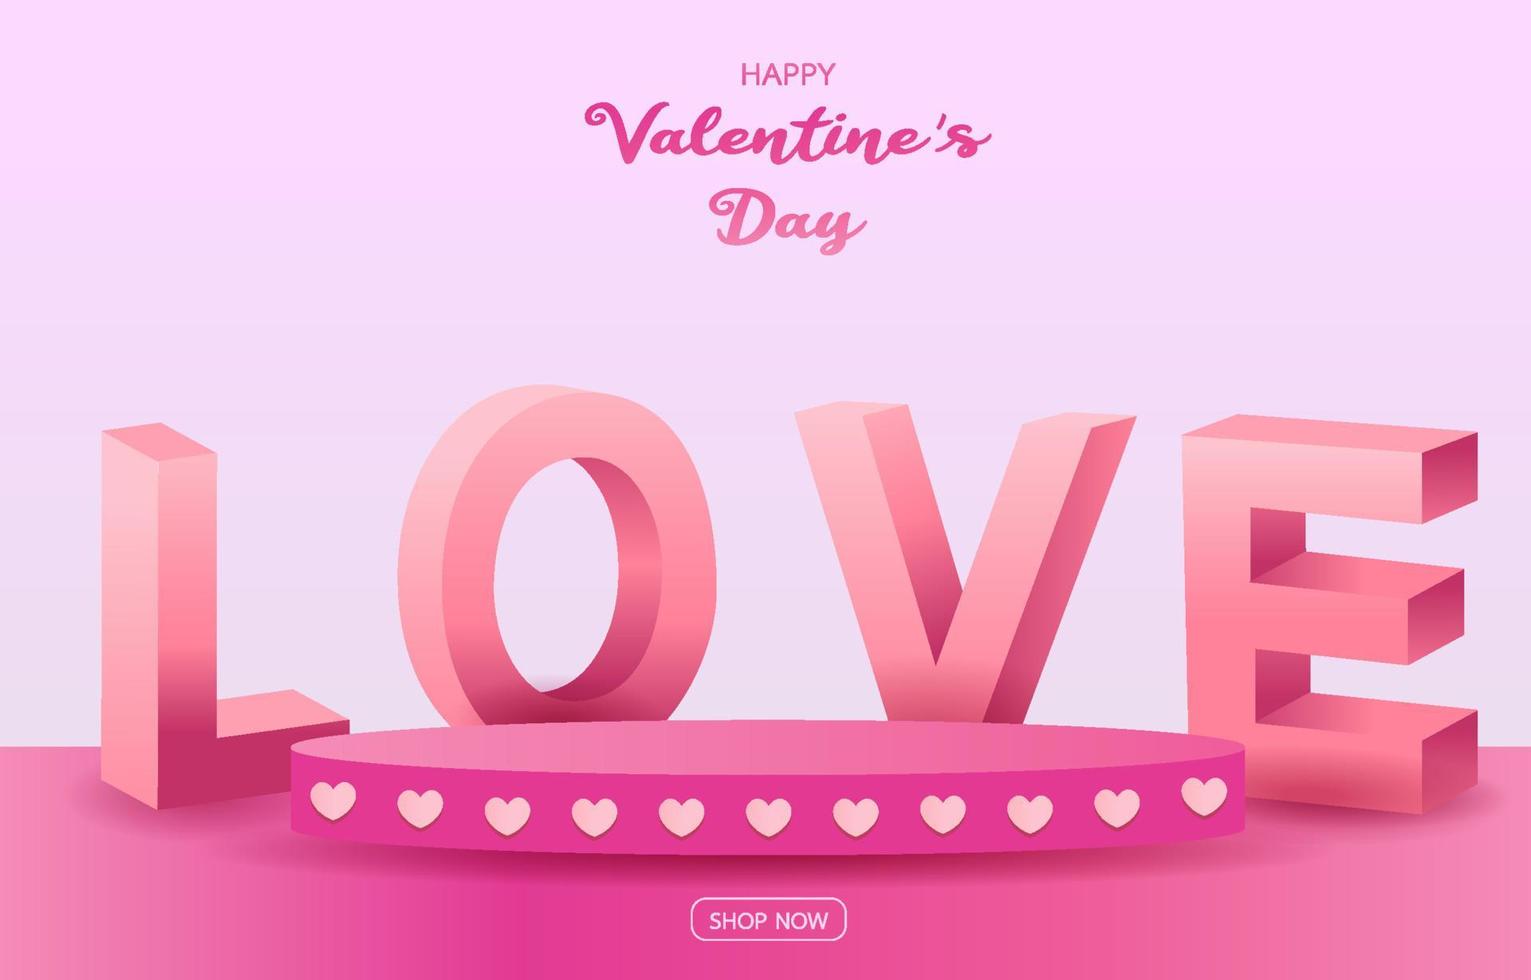 Pink stage for placing products. Empty cylinder podium. Concept of love or Valentine's Day. Sweet pink background decorated with hearts, Gift boxes, and shopping bags. Designed for background, banner vector